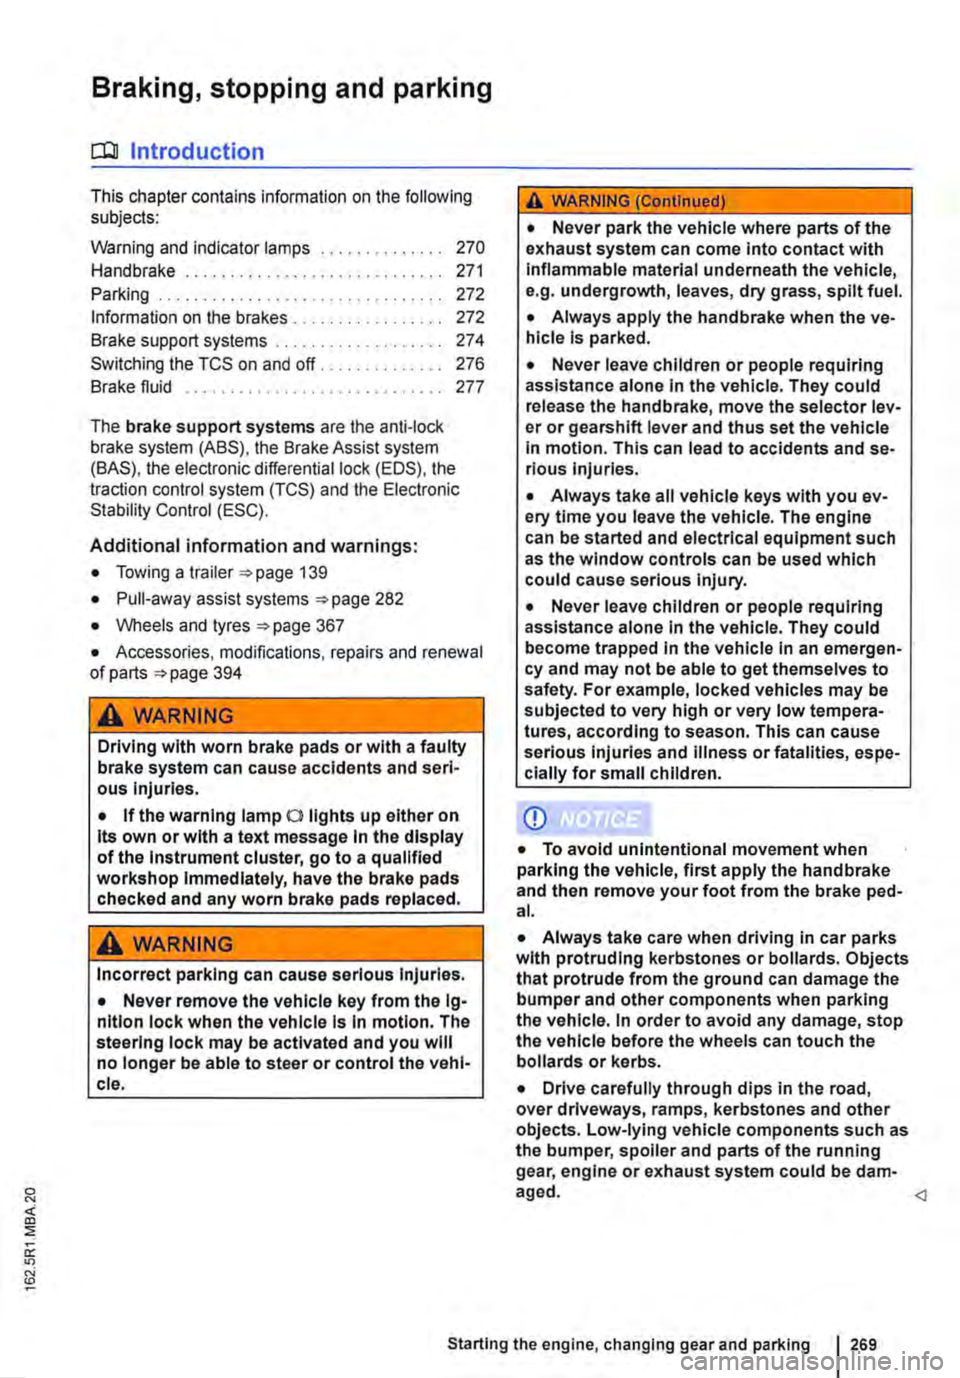 VOLKSWAGEN TRANSPORTER 2011  Owners Manual Braking, stopping and parking 
COl Introduction 
This chapter contains information on the following subjects: 
Warning and indicator lamps Handbrake ............................ . 
Parking . . . . . .